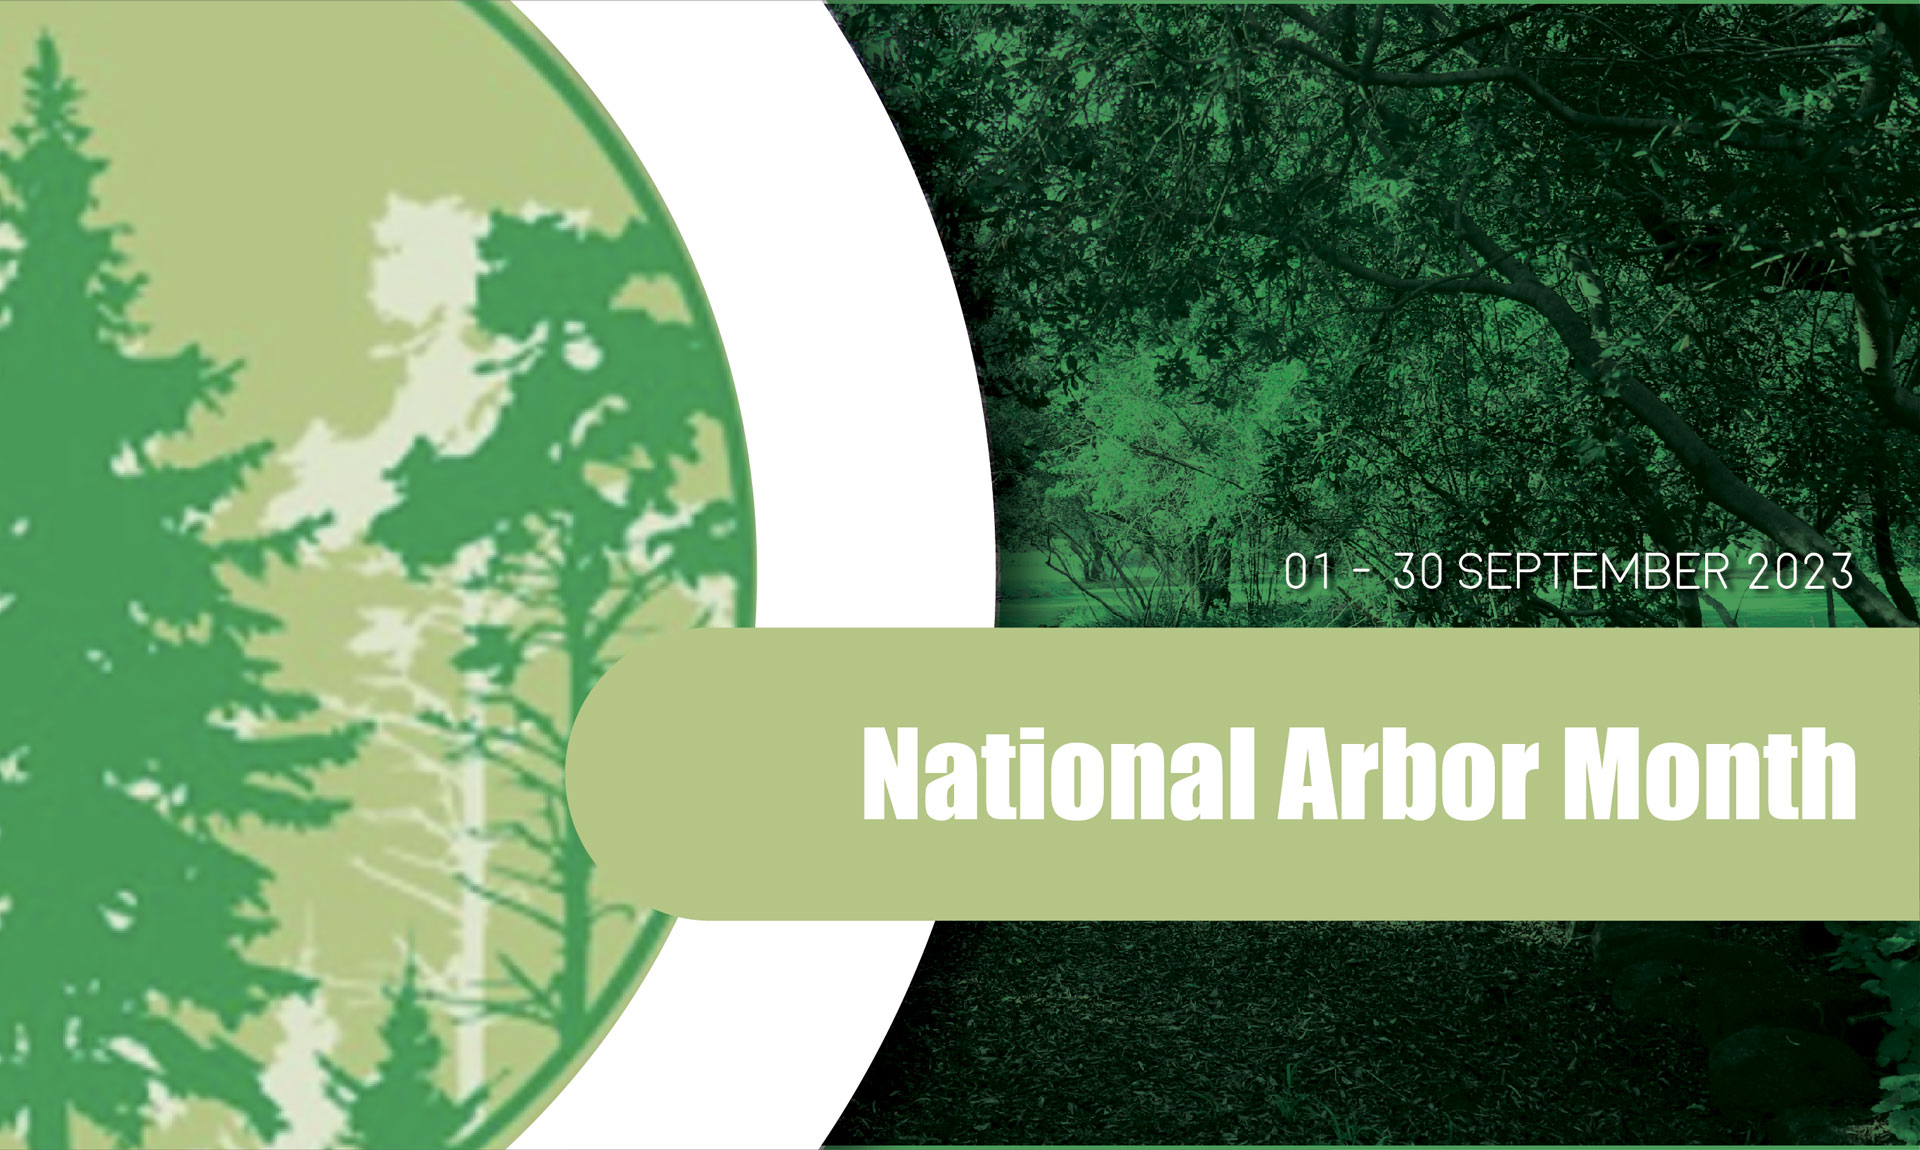 National Arbor Month